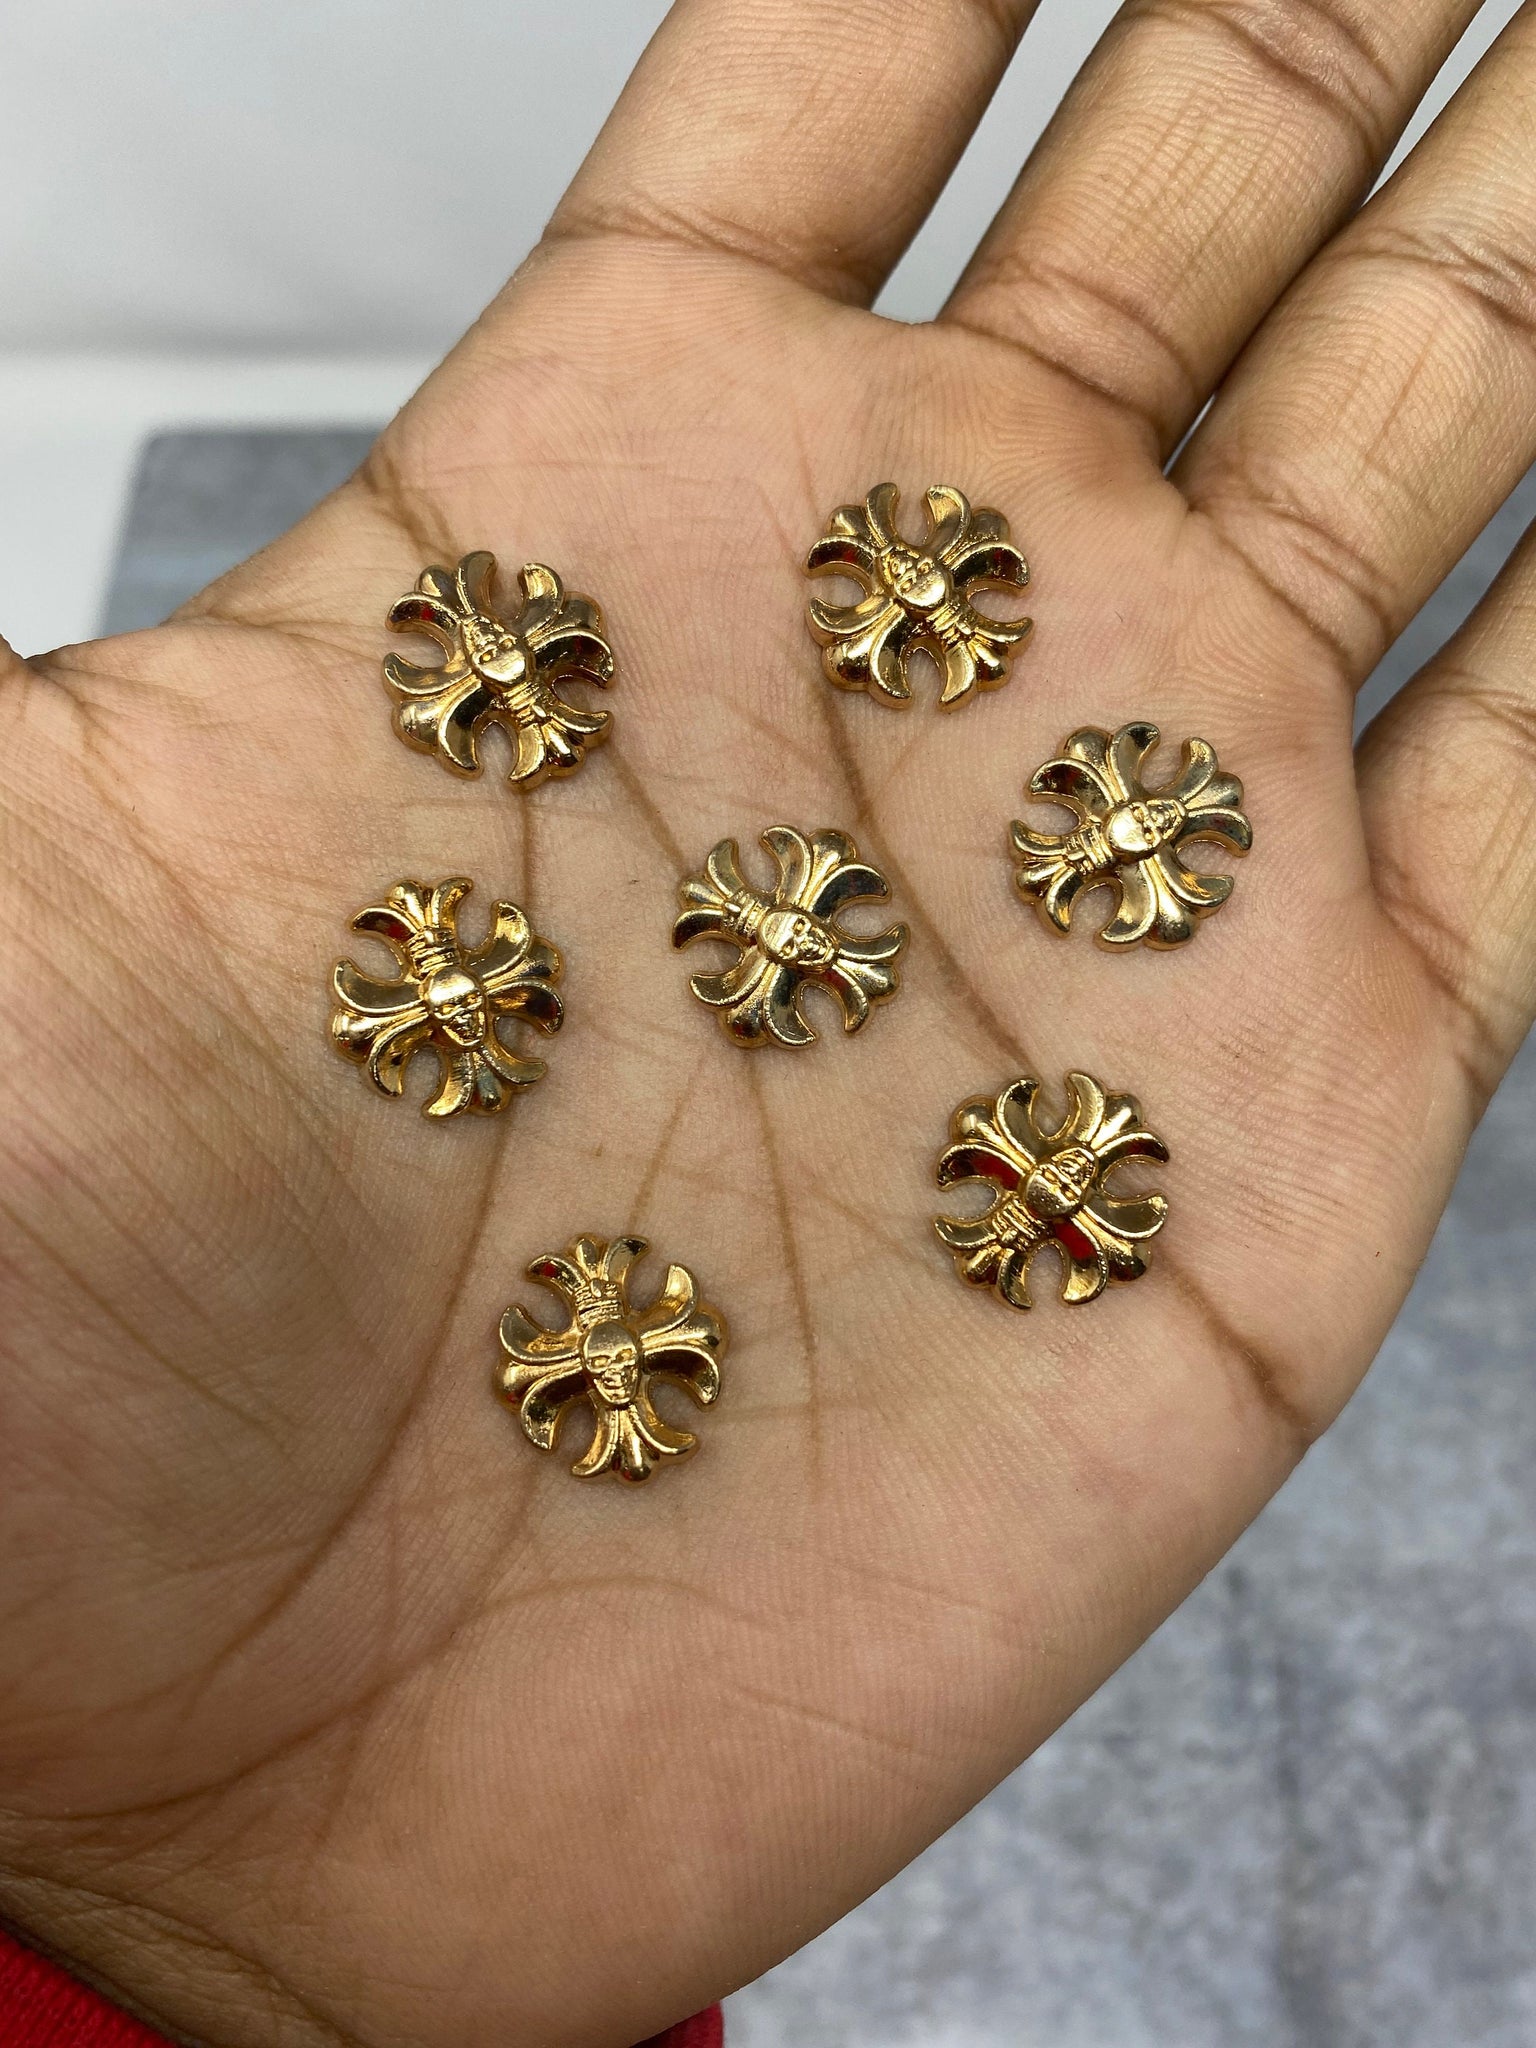 NEW, Hotfix Royal Cross Studs, 100 Pcs, (One Size), Great for Denim, Sweaters, Camo Jackets, Belts, Bags, Shoes, Crafts,+ MORE!